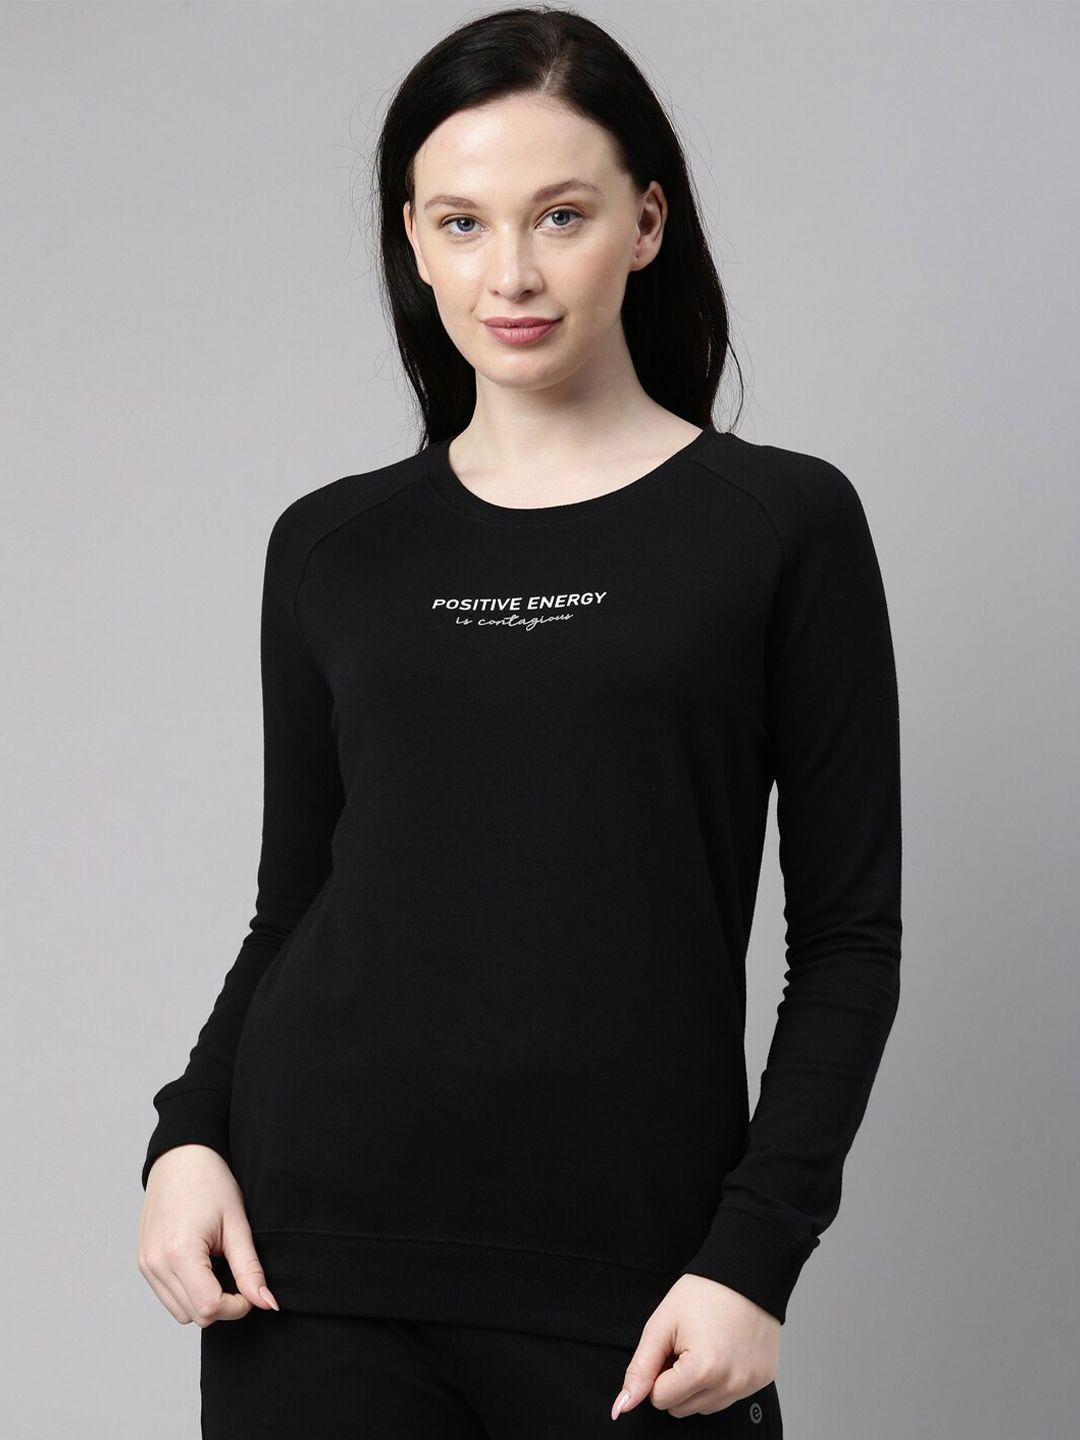 enamor-e079-crew-neck-stretch-cotton-basic-sweatshirt-for-women-with-long-sleeves